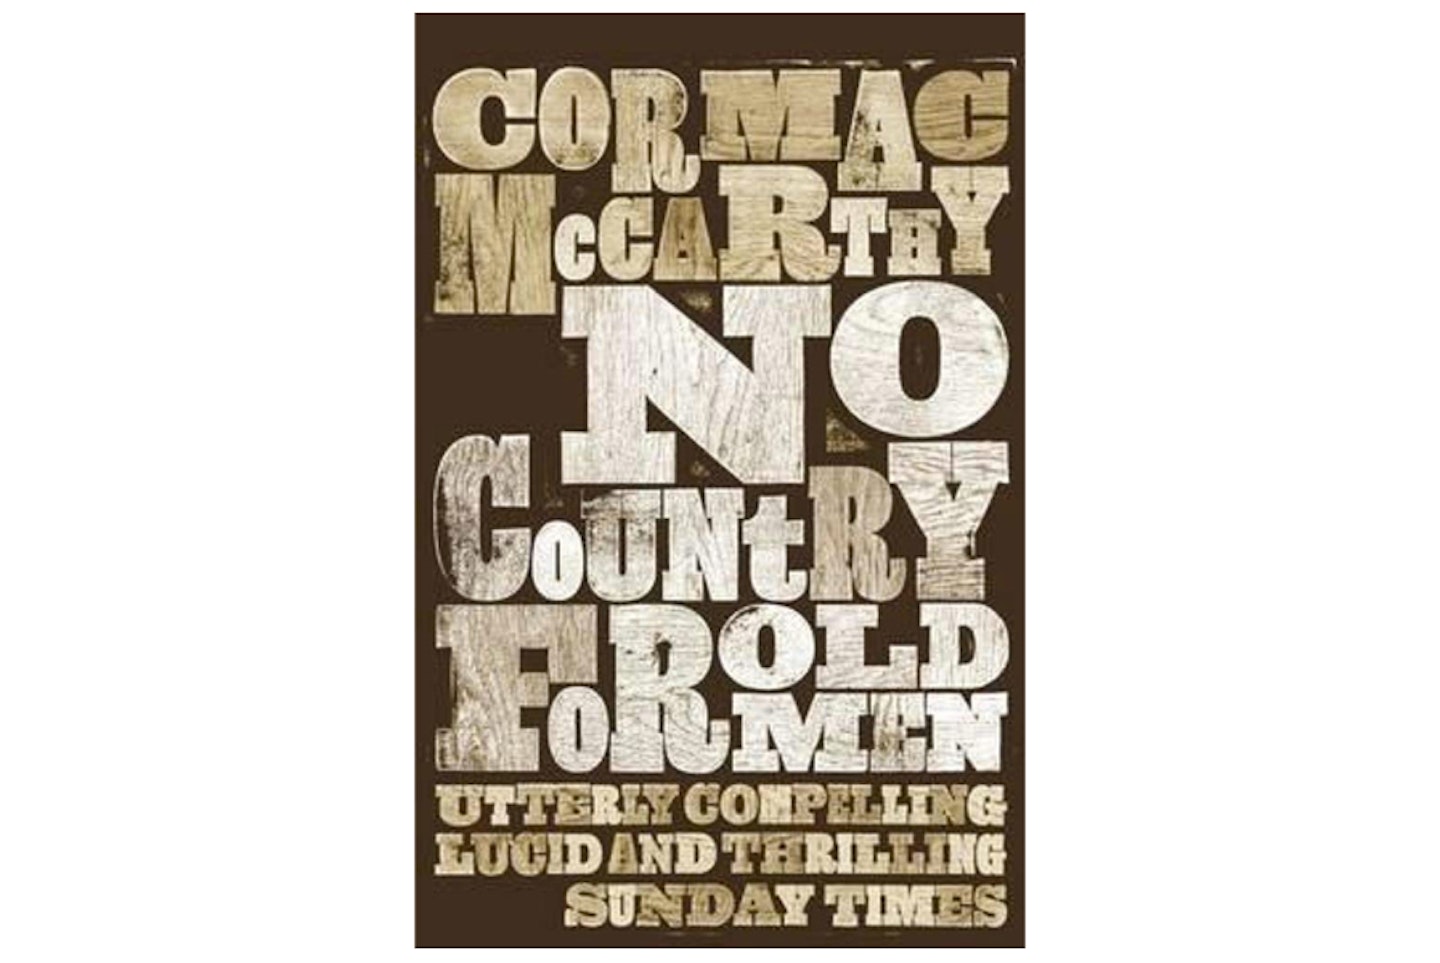 No Country for Old Men by Cormac McCarthy, £8.99